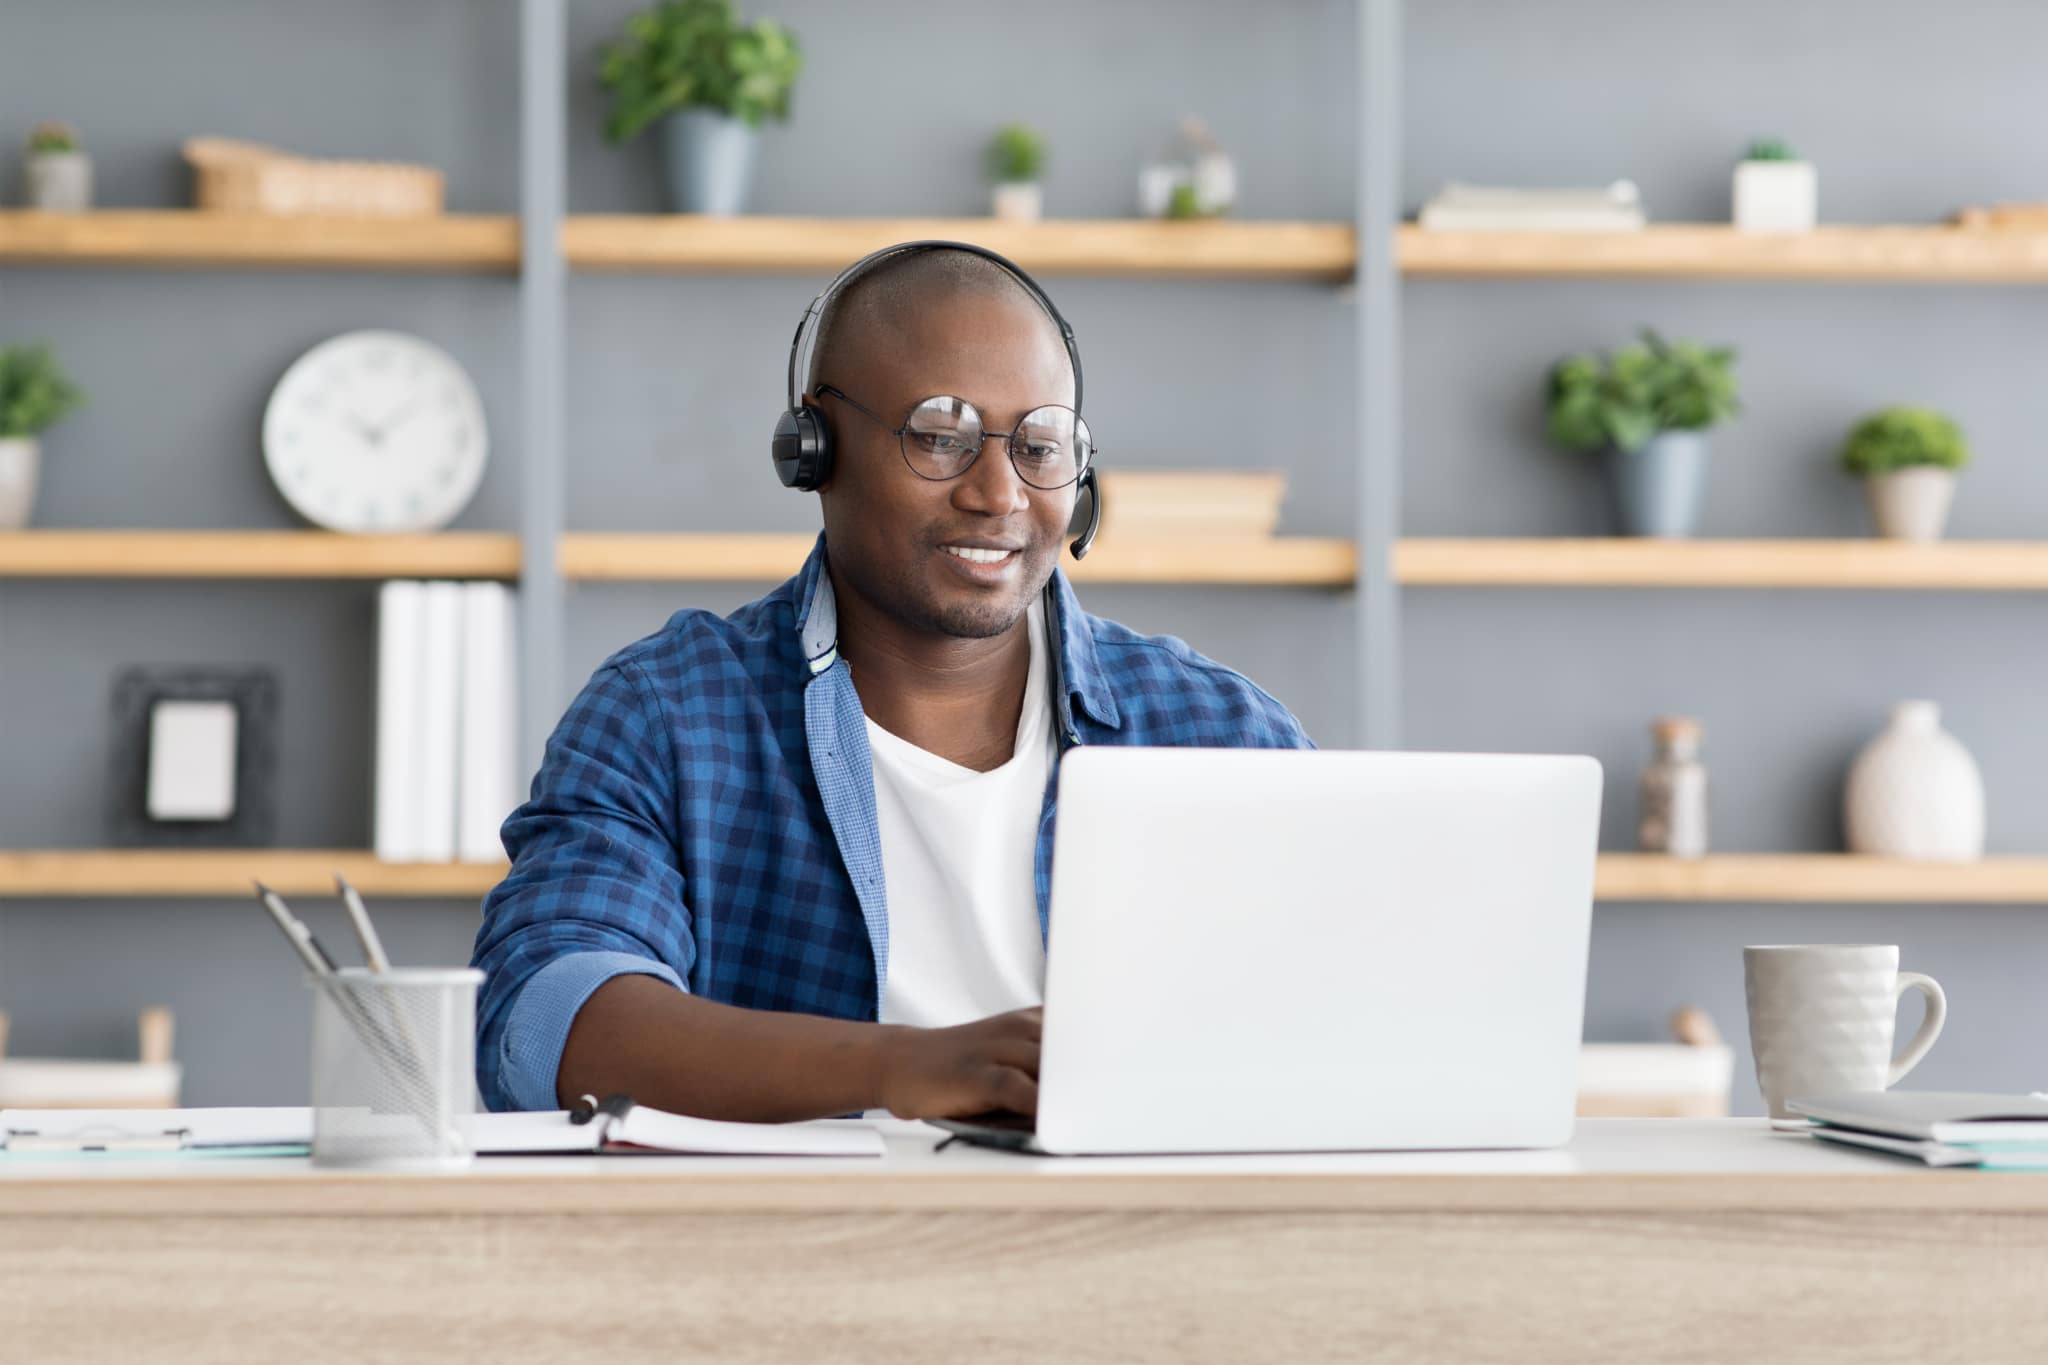 Hotline support service. African american male call center operator in headset working with laptop computer at home